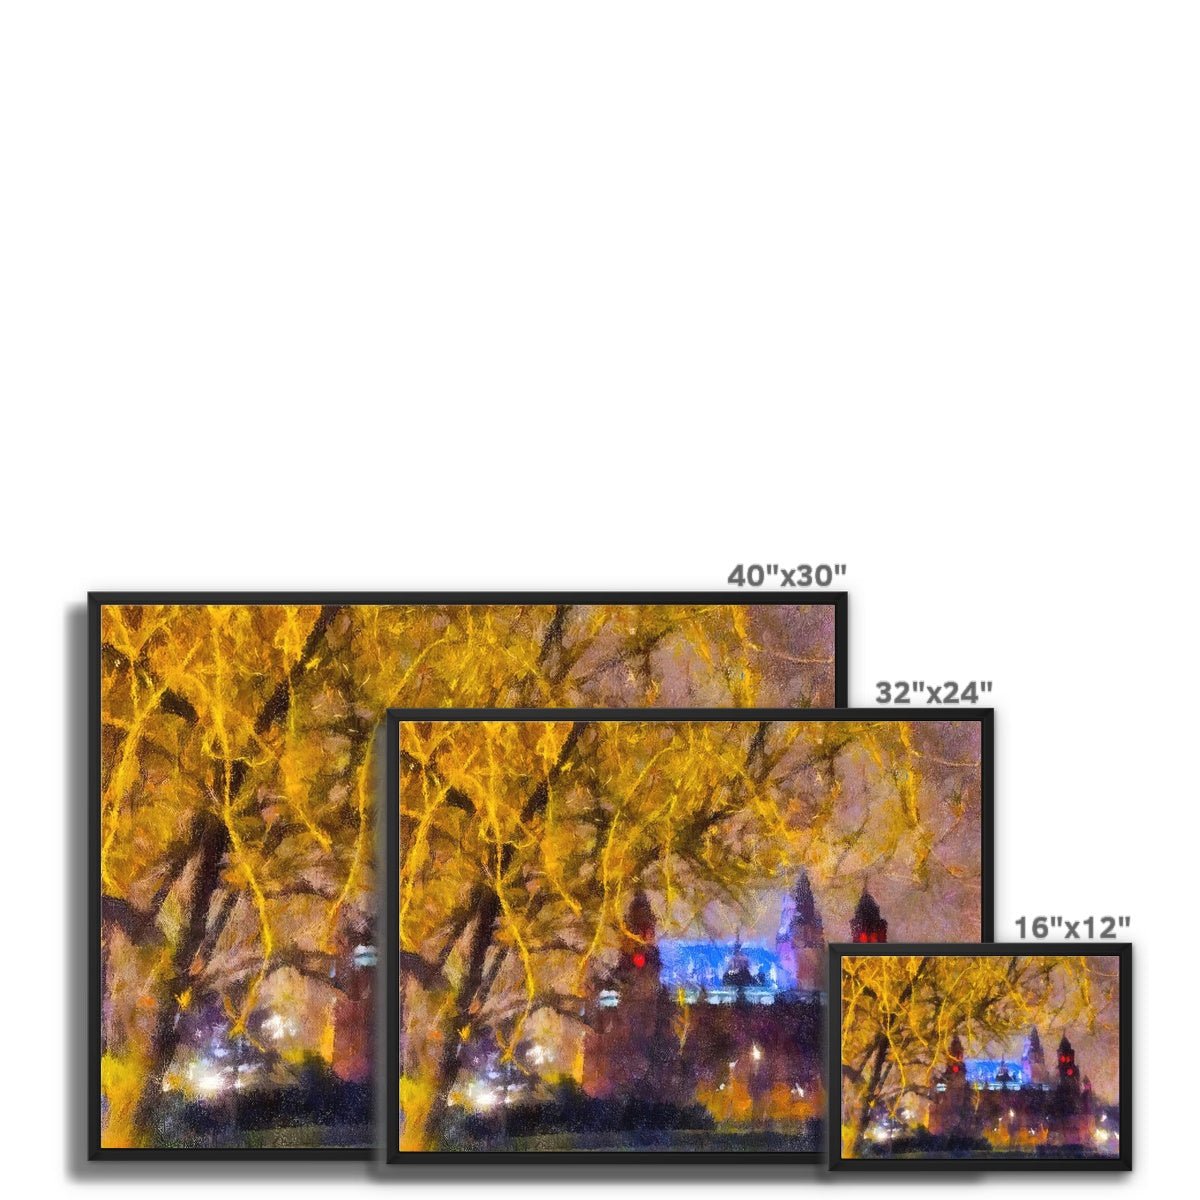 Kelvingrove Nights Painting | Framed Canvas From Scotland-Floating Framed Canvas Prints-Edinburgh & Glasgow Art Gallery-Paintings, Prints, Homeware, Art Gifts From Scotland By Scottish Artist Kevin Hunter